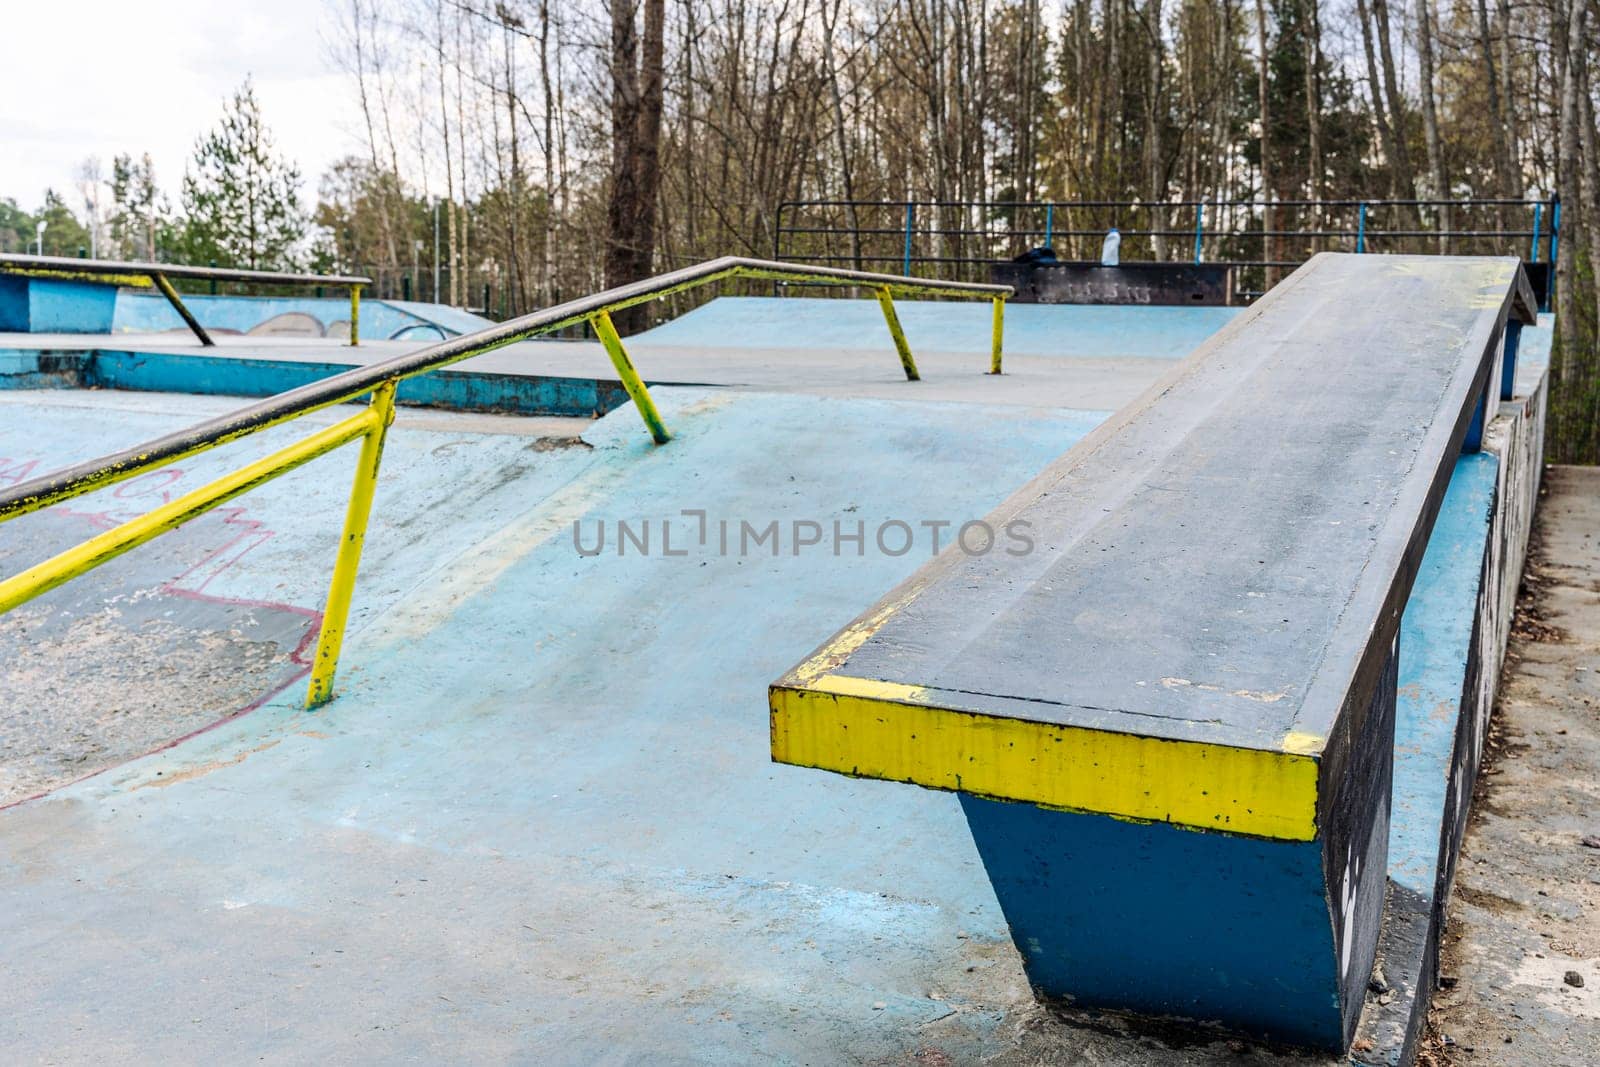 a ramp with an iron ramp for jumping in a skate park by audiznam2609